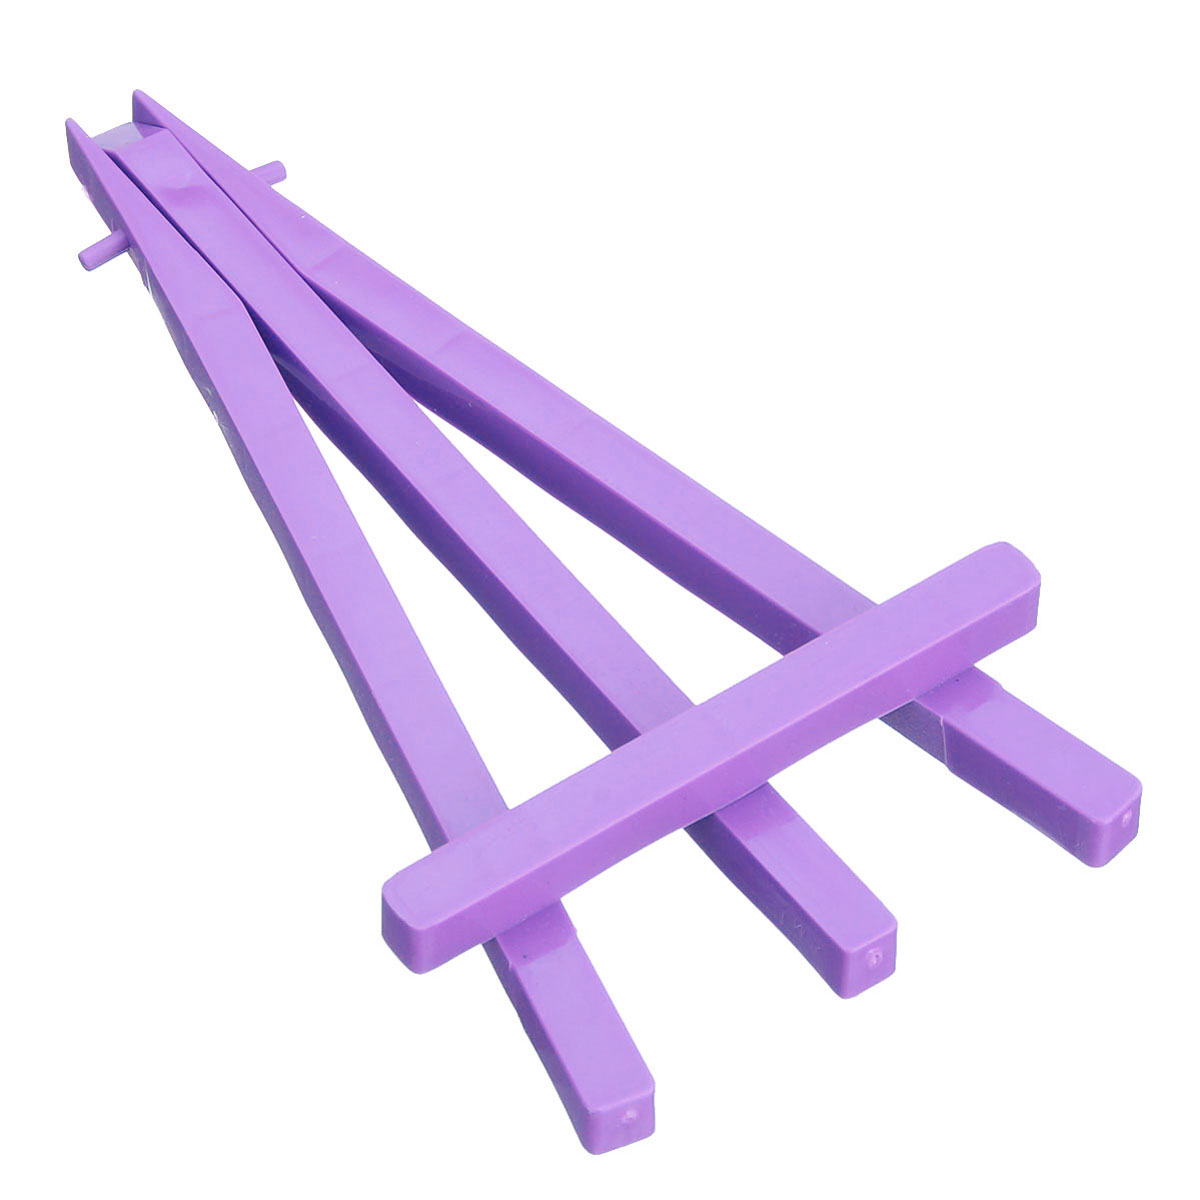 Colorful-Plastic-Tripod-Easel-Display-Painting-Stand-Card-Paintings-Holder-Wedding-Party-1383545